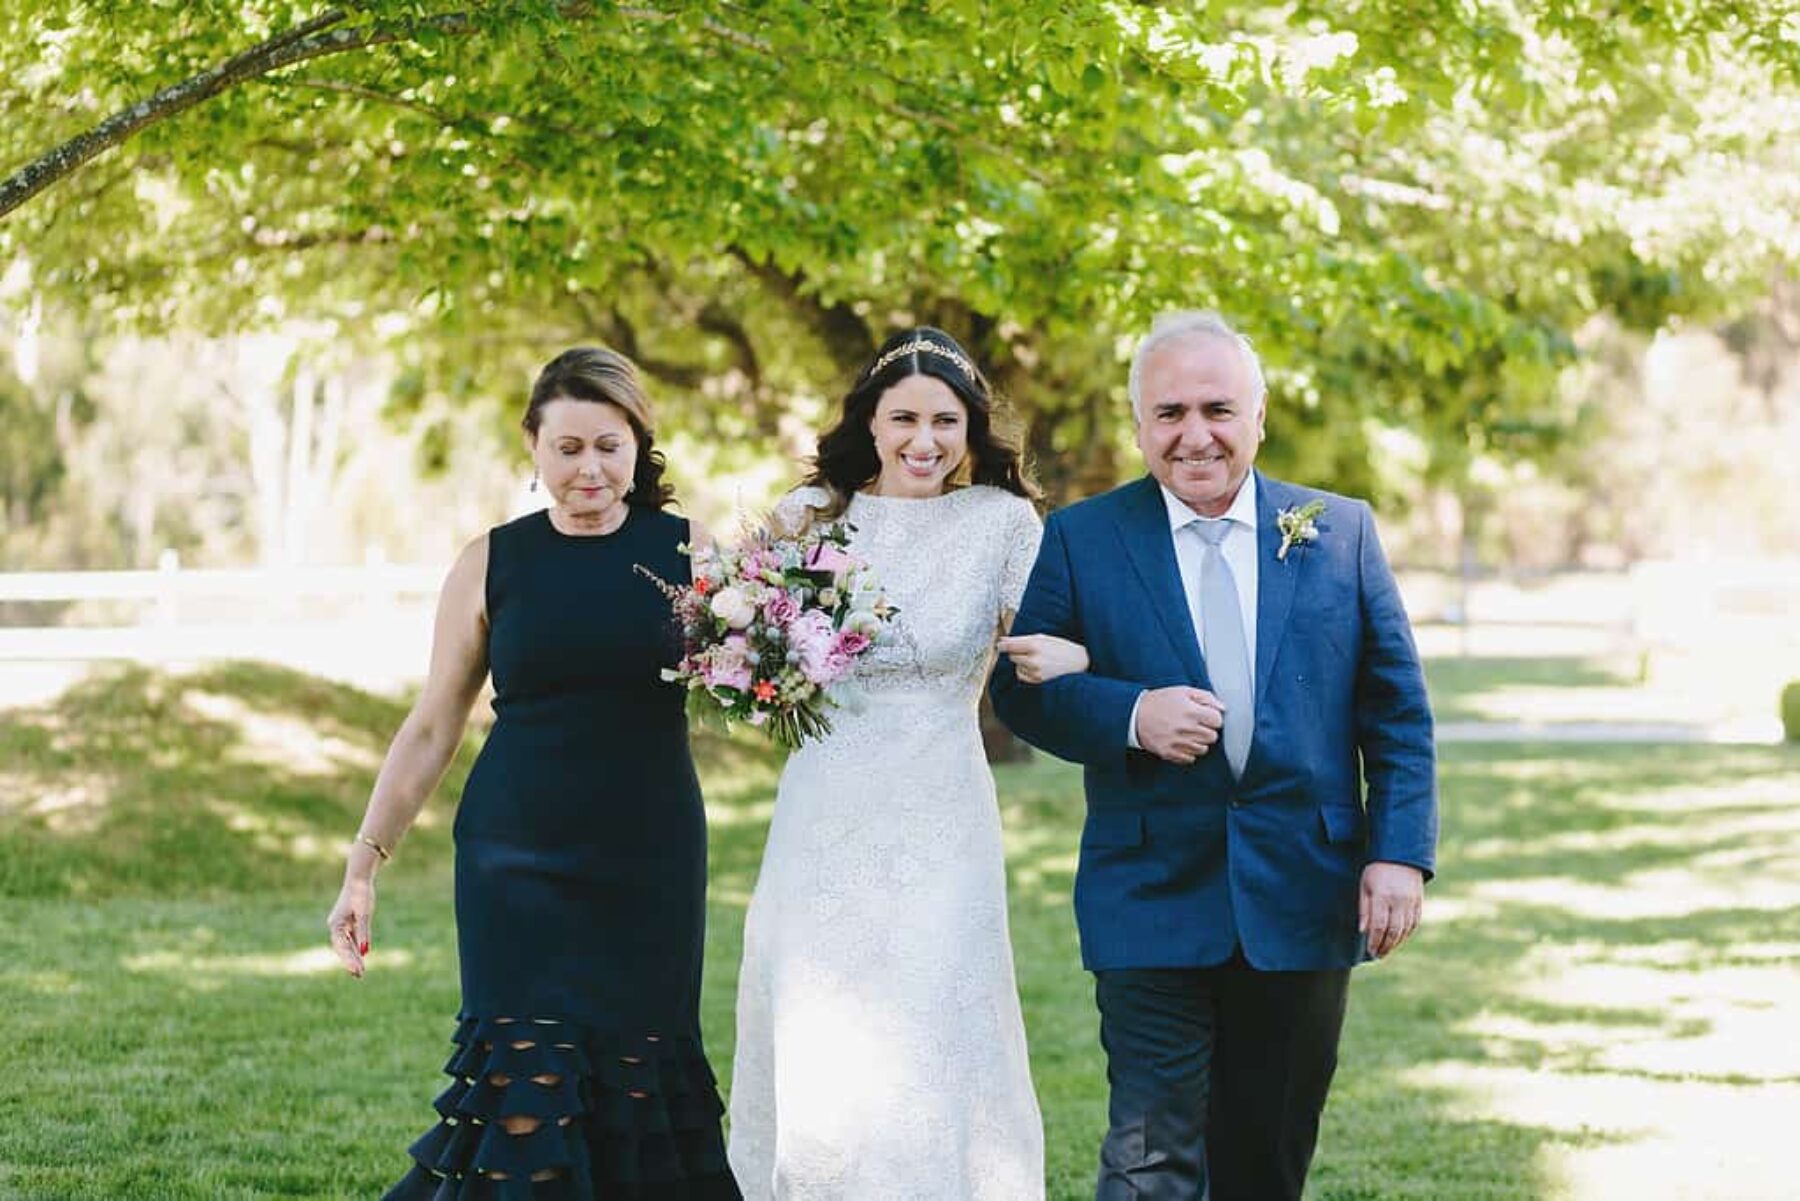 Sault Daylesford wedding - photography by Jonathan Ong